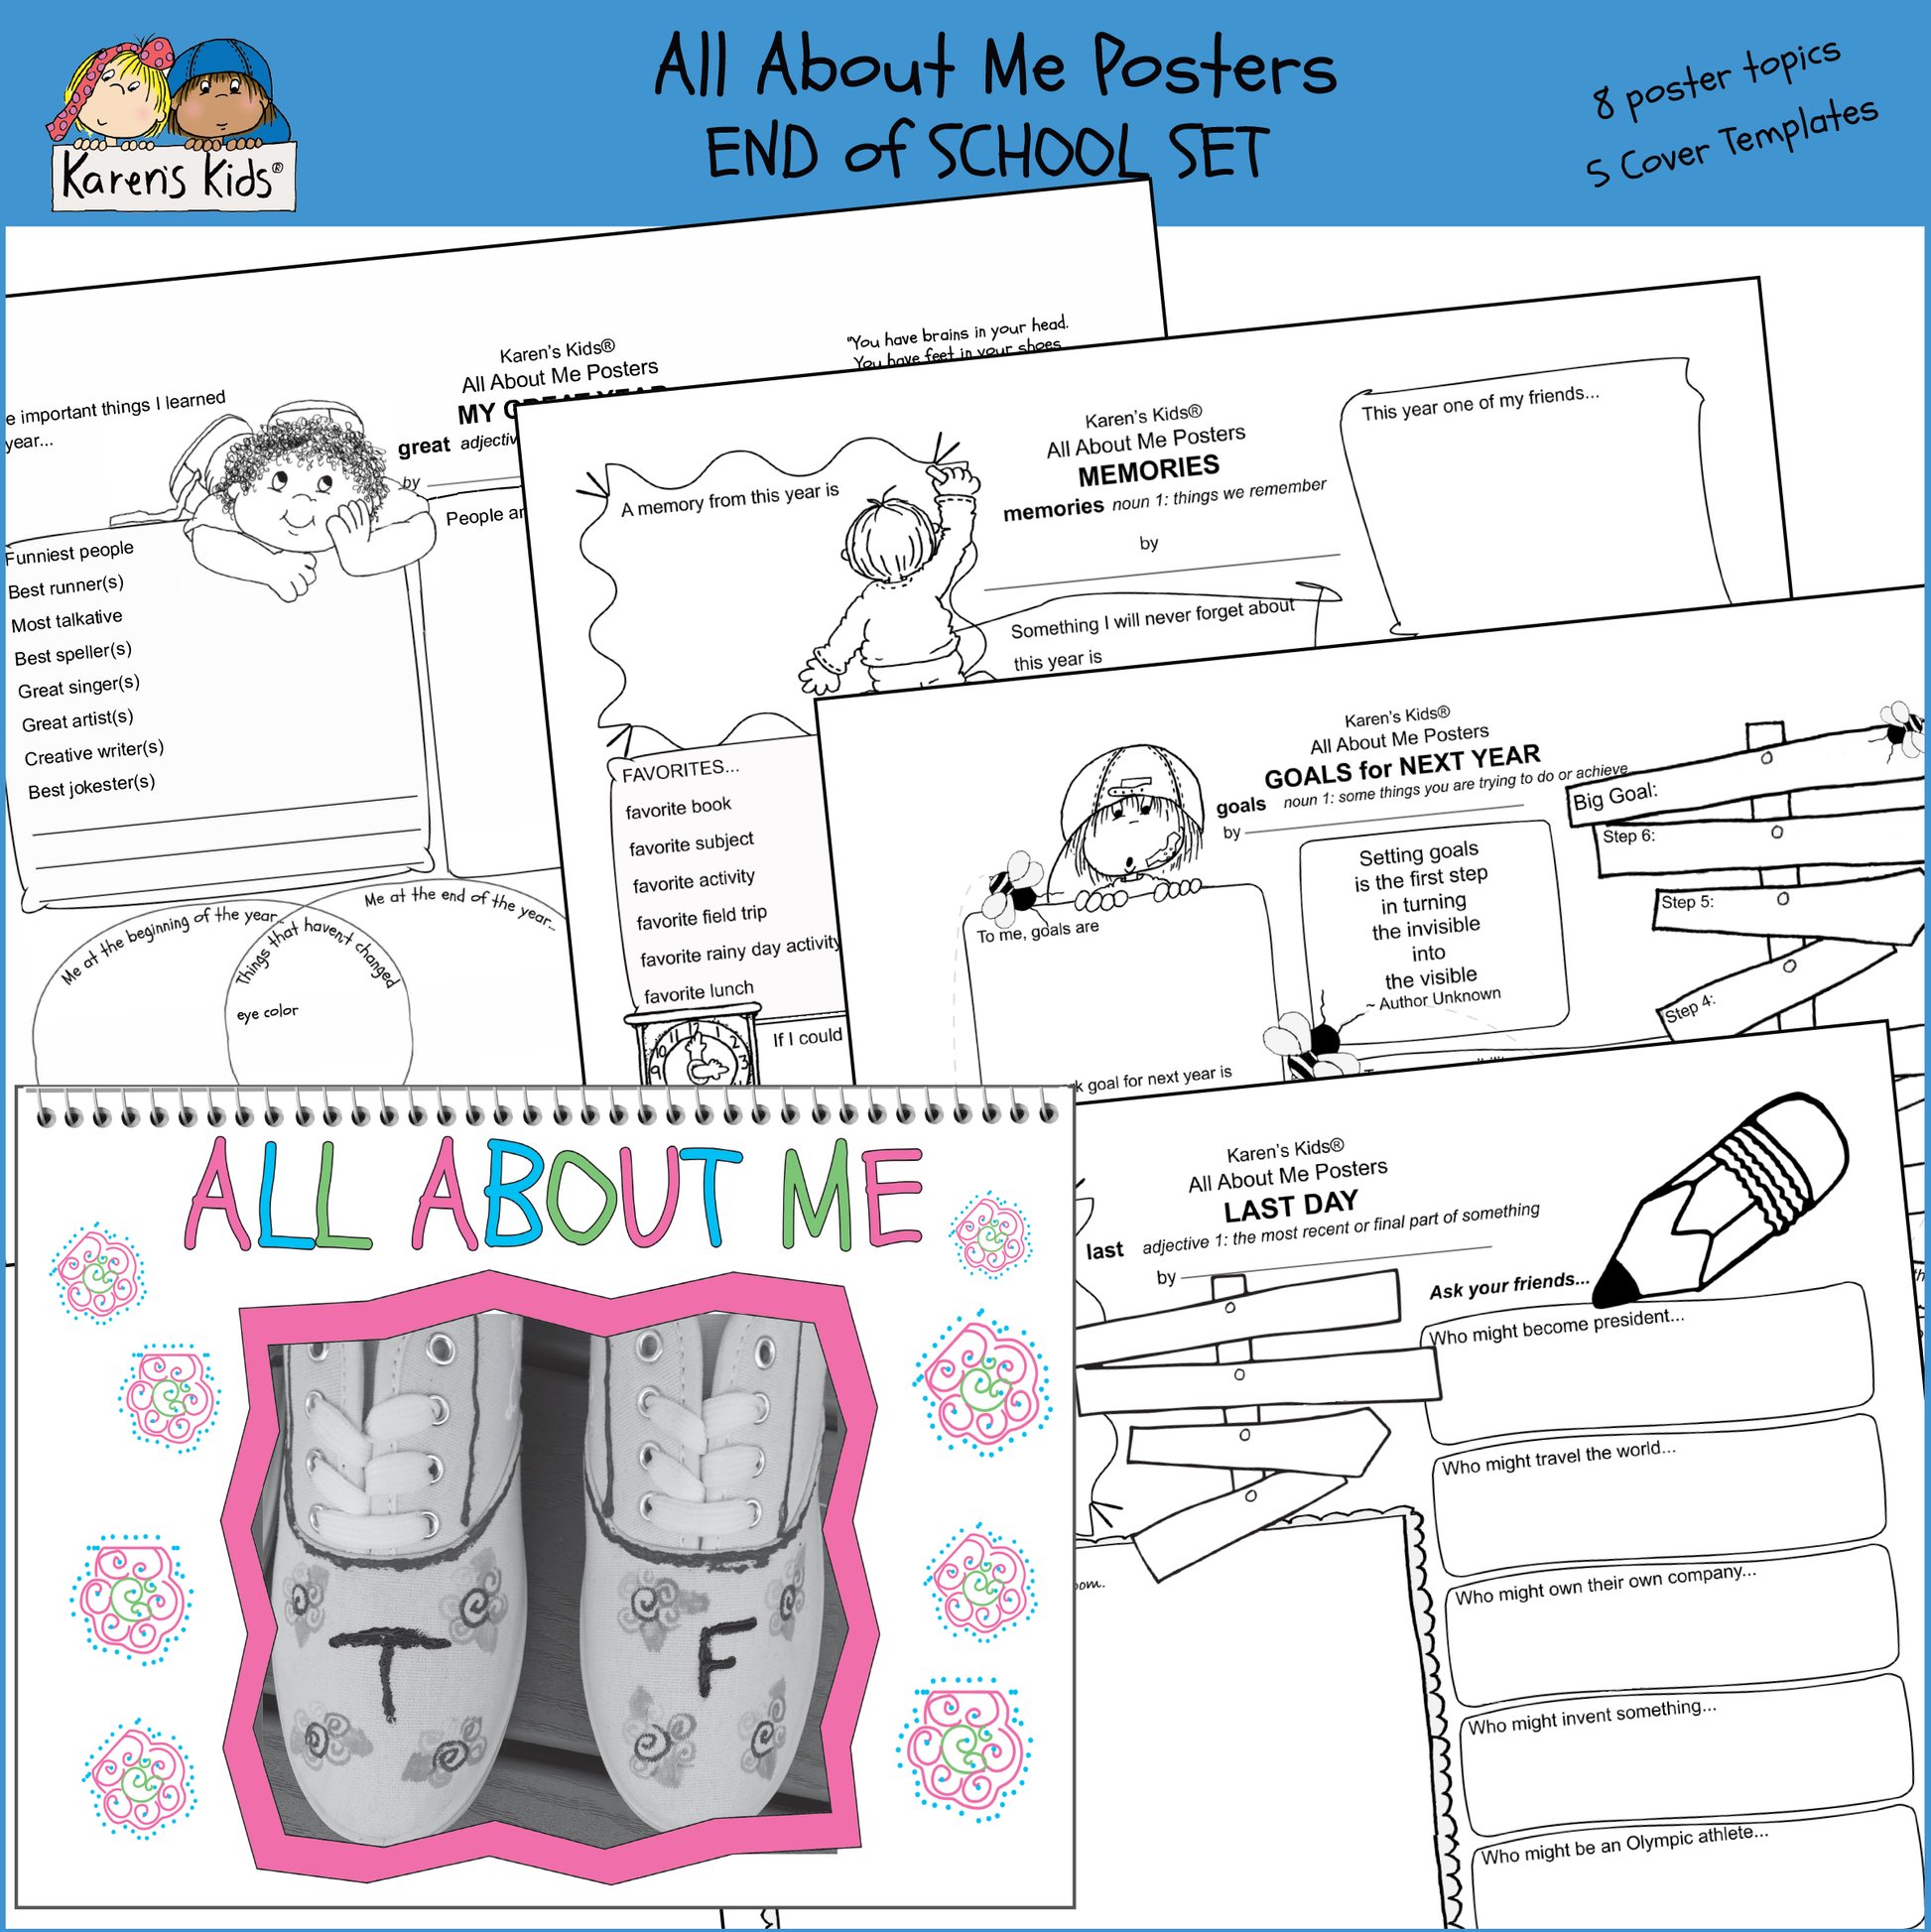 All About Me personal poster printables.  Students fill in prompts about the school year, memories and activities.